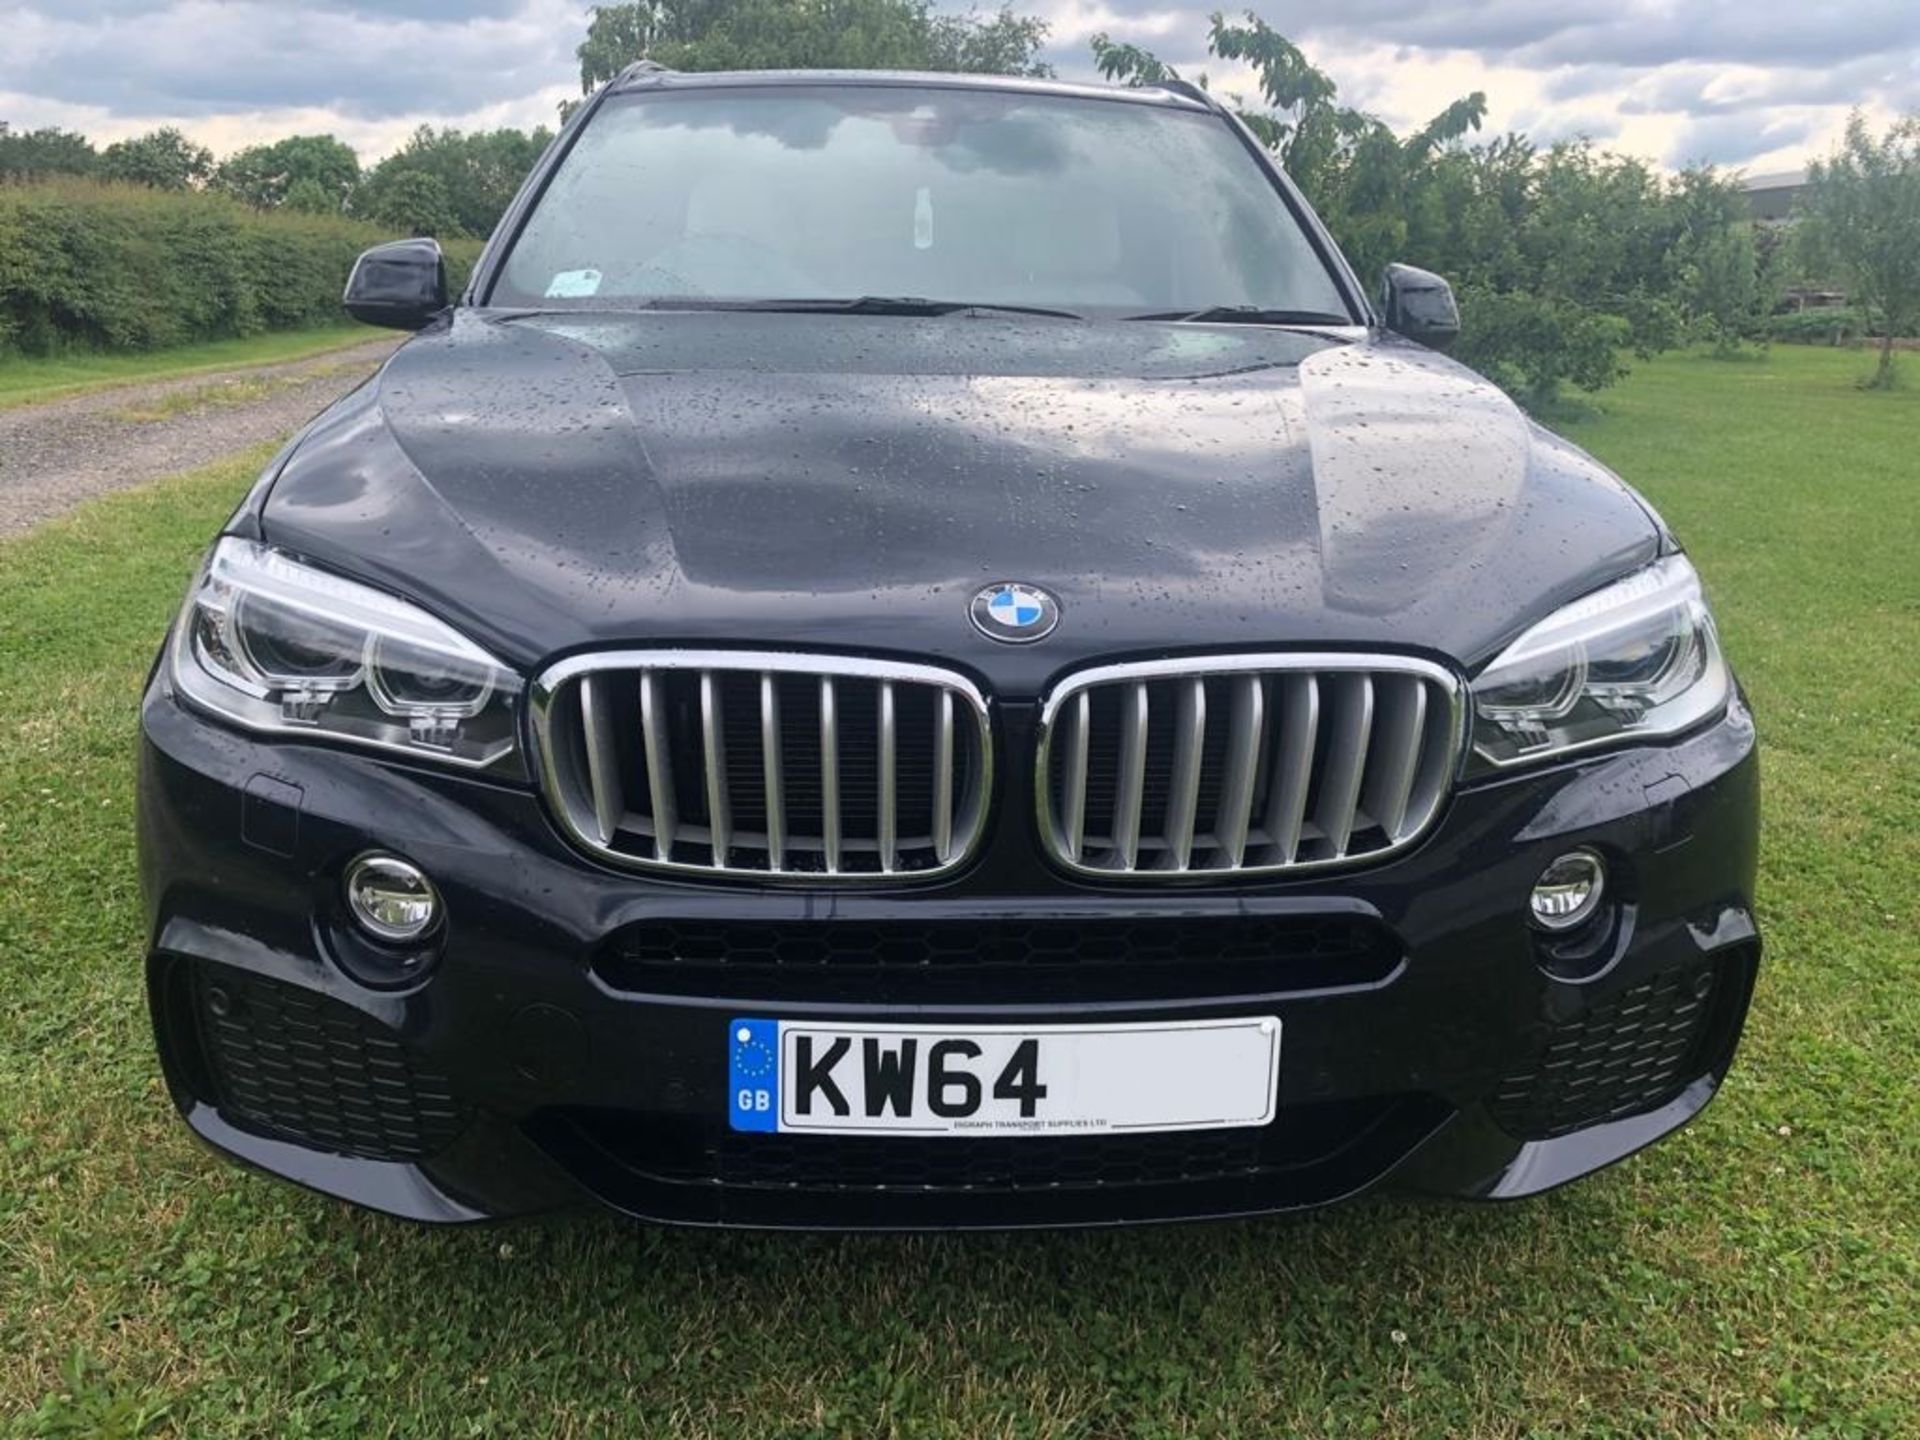 2015/64 REG BMW X5 XDRIVE 40D M SPORT AUTO 3.0 DIESEL, SHOWING 1 OWNER FROM NEW *NO VAT* - Image 2 of 21